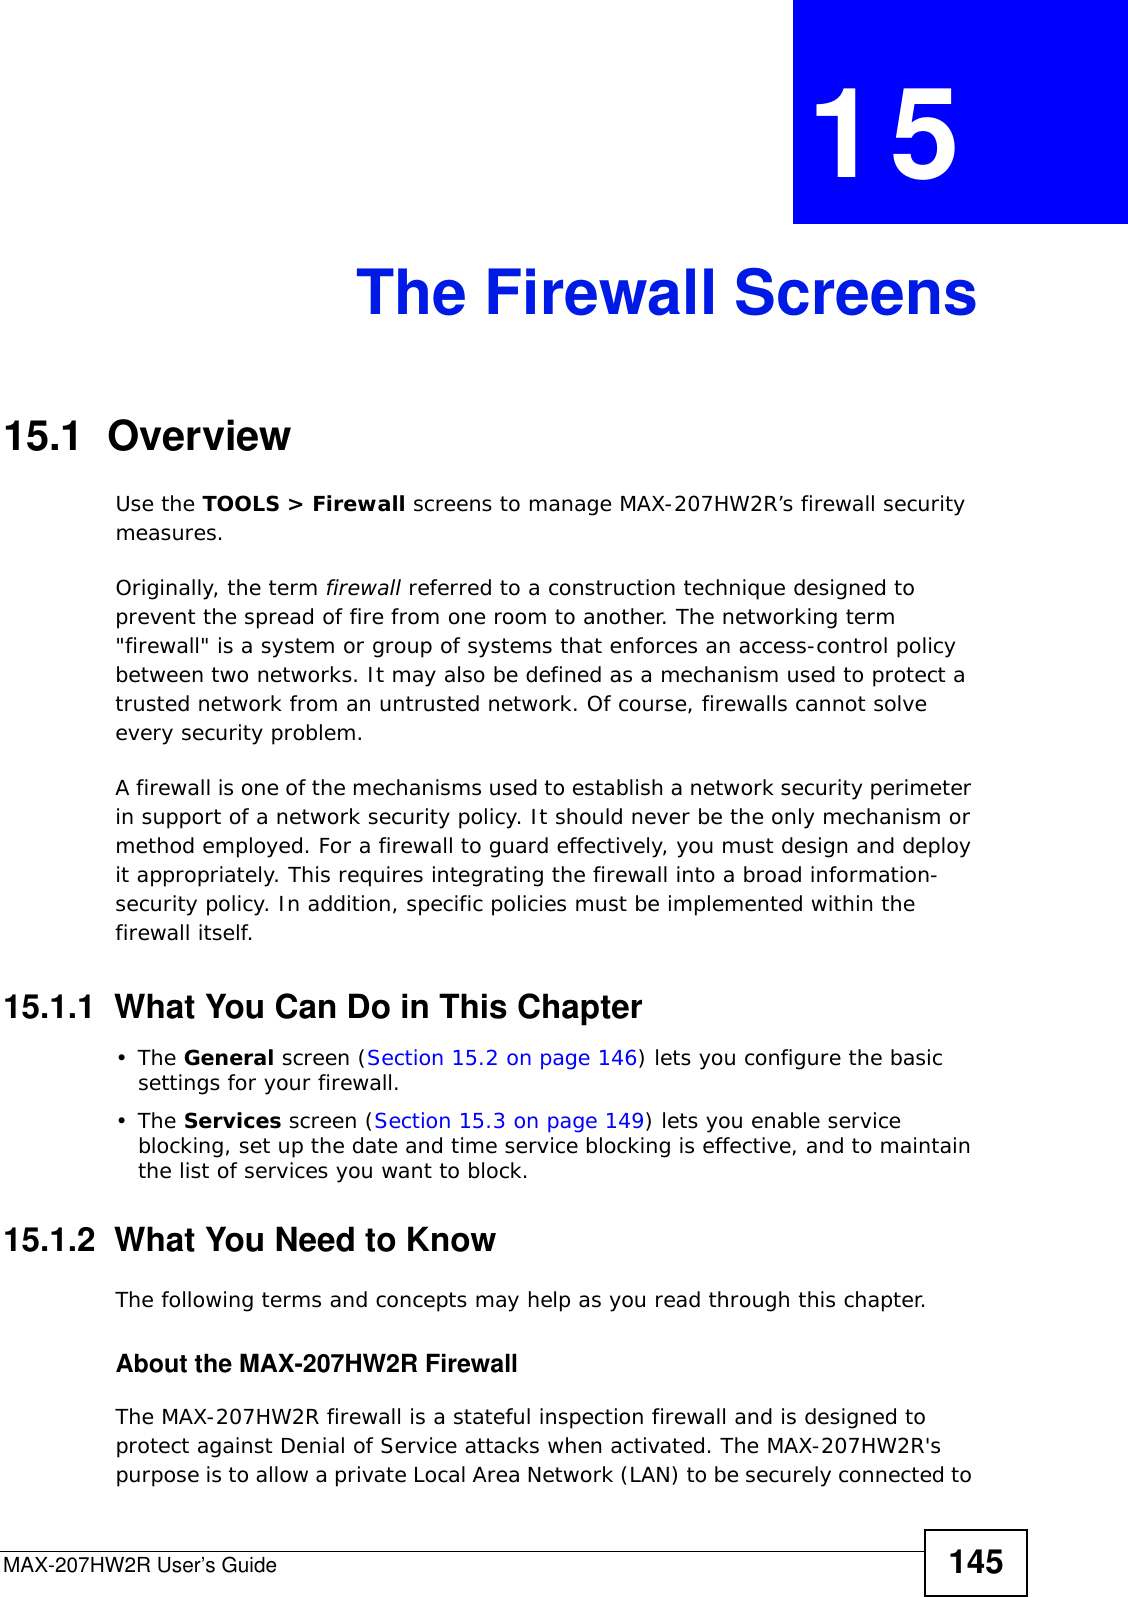 MAX-207HW2R User’s Guide 145CHAPTER  15 The Firewall Screens15.1  OverviewUse the TOOLS &gt; Firewall screens to manage MAX-207HW2R’s firewall security measures.Originally, the term firewall referred to a construction technique designed to prevent the spread of fire from one room to another. The networking term &quot;firewall&quot; is a system or group of systems that enforces an access-control policy between two networks. It may also be defined as a mechanism used to protect a trusted network from an untrusted network. Of course, firewalls cannot solve every security problem.A firewall is one of the mechanisms used to establish a network security perimeter in support of a network security policy. It should never be the only mechanism or method employed. For a firewall to guard effectively, you must design and deploy it appropriately. This requires integrating the firewall into a broad information-security policy. In addition, specific policies must be implemented within the firewall itself.15.1.1  What You Can Do in This Chapter•The General screen (Section 15.2 on page 146) lets you configure the basic settings for your firewall.•The Services screen (Section 15.3 on page 149) lets you enable service blocking, set up the date and time service blocking is effective, and to maintain the list of services you want to block.15.1.2  What You Need to KnowThe following terms and concepts may help as you read through this chapter.About the MAX-207HW2R FirewallThe MAX-207HW2R firewall is a stateful inspection firewall and is designed to protect against Denial of Service attacks when activated. The MAX-207HW2R&apos;s purpose is to allow a private Local Area Network (LAN) to be securely connected to 